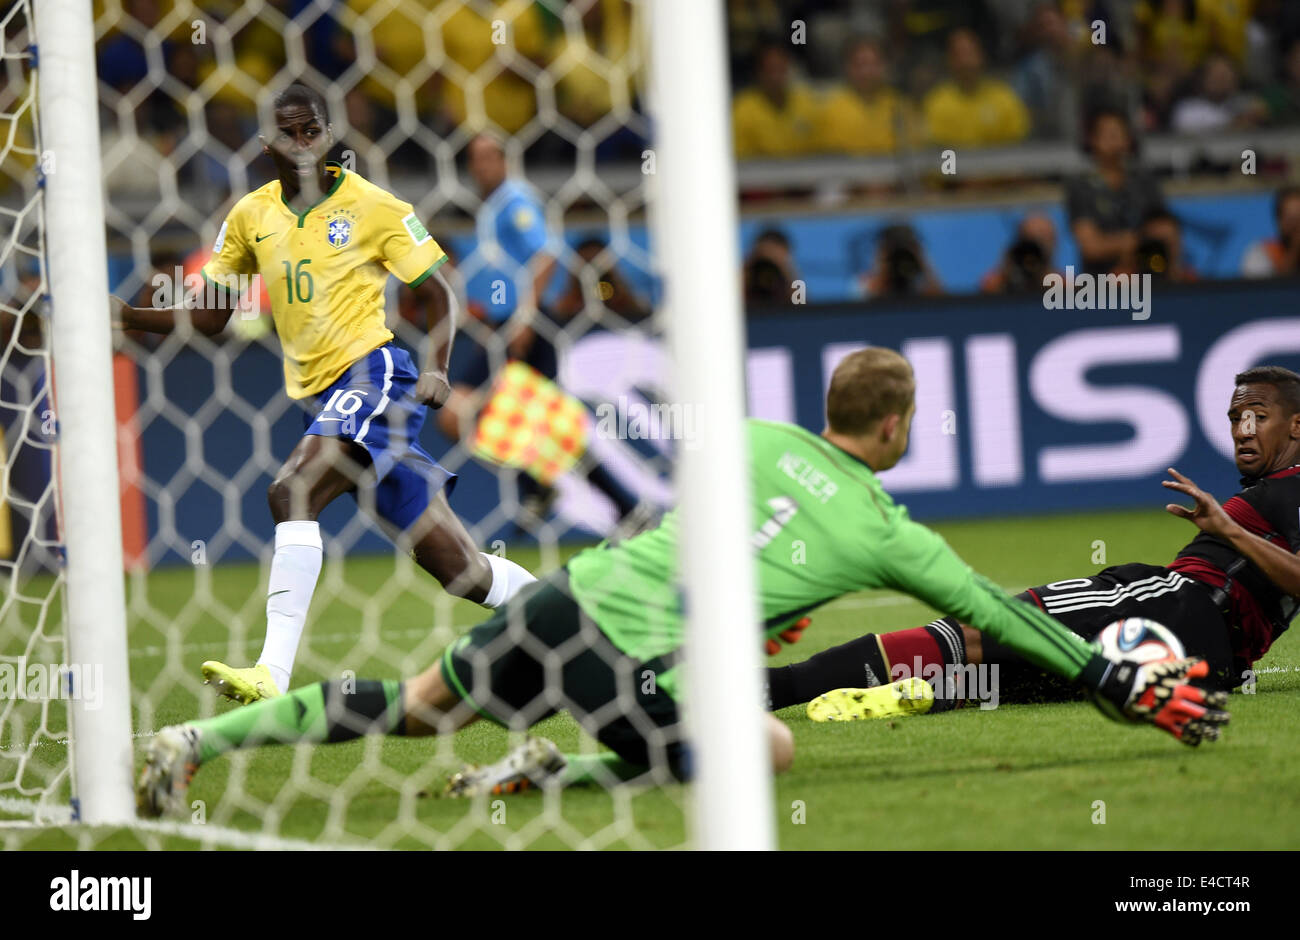 Belo Horizonte, Brazil. 8th July, 2014. Germany's goalkeeper Manuel Neuer (front) blocks the ball shot by Brazil's Ramires (L) during a semifinal match between Brazil and Germany of 2014 FIFA World Cup at the Estadio Mineirao Stadium in Belo Horizonte, Brazil, on July 8, 2014. Germany won 7-1 over Brazil and qualified for the final on Tuesday. Credit:  Qi Heng/Xinhua/Alamy Live News Stock Photo